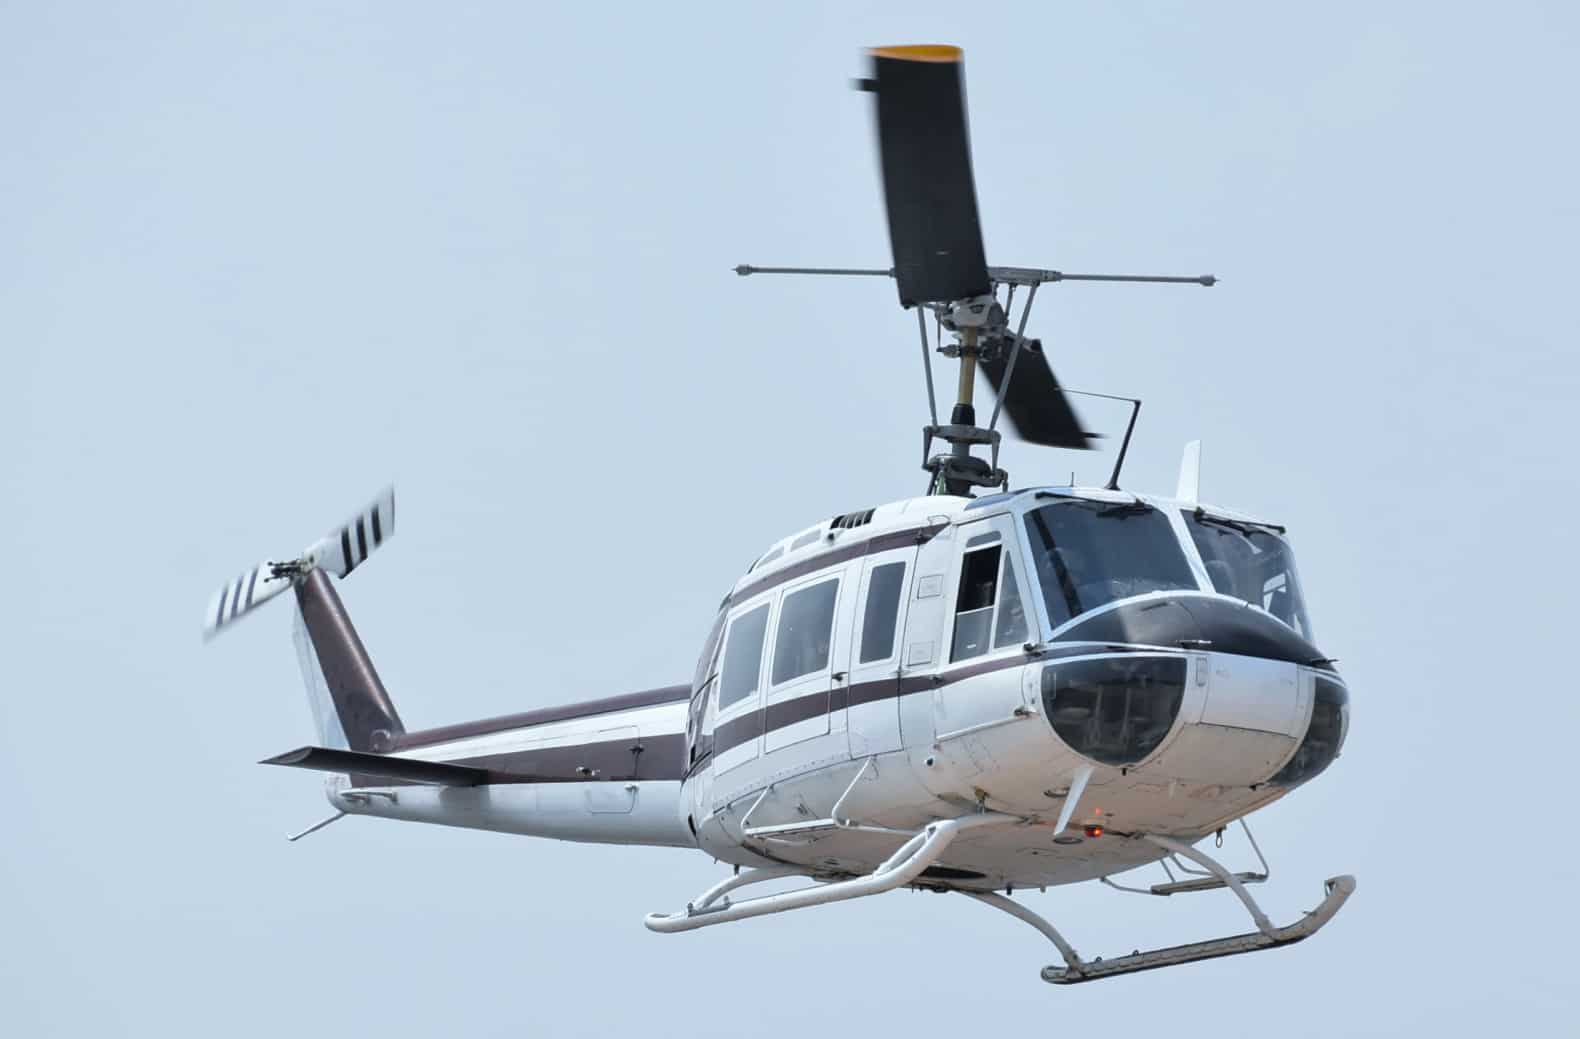 AVPRO Knows HTC (Helicopter Technology Company) & Van Horn Rotor Blades for Bell Helicopters